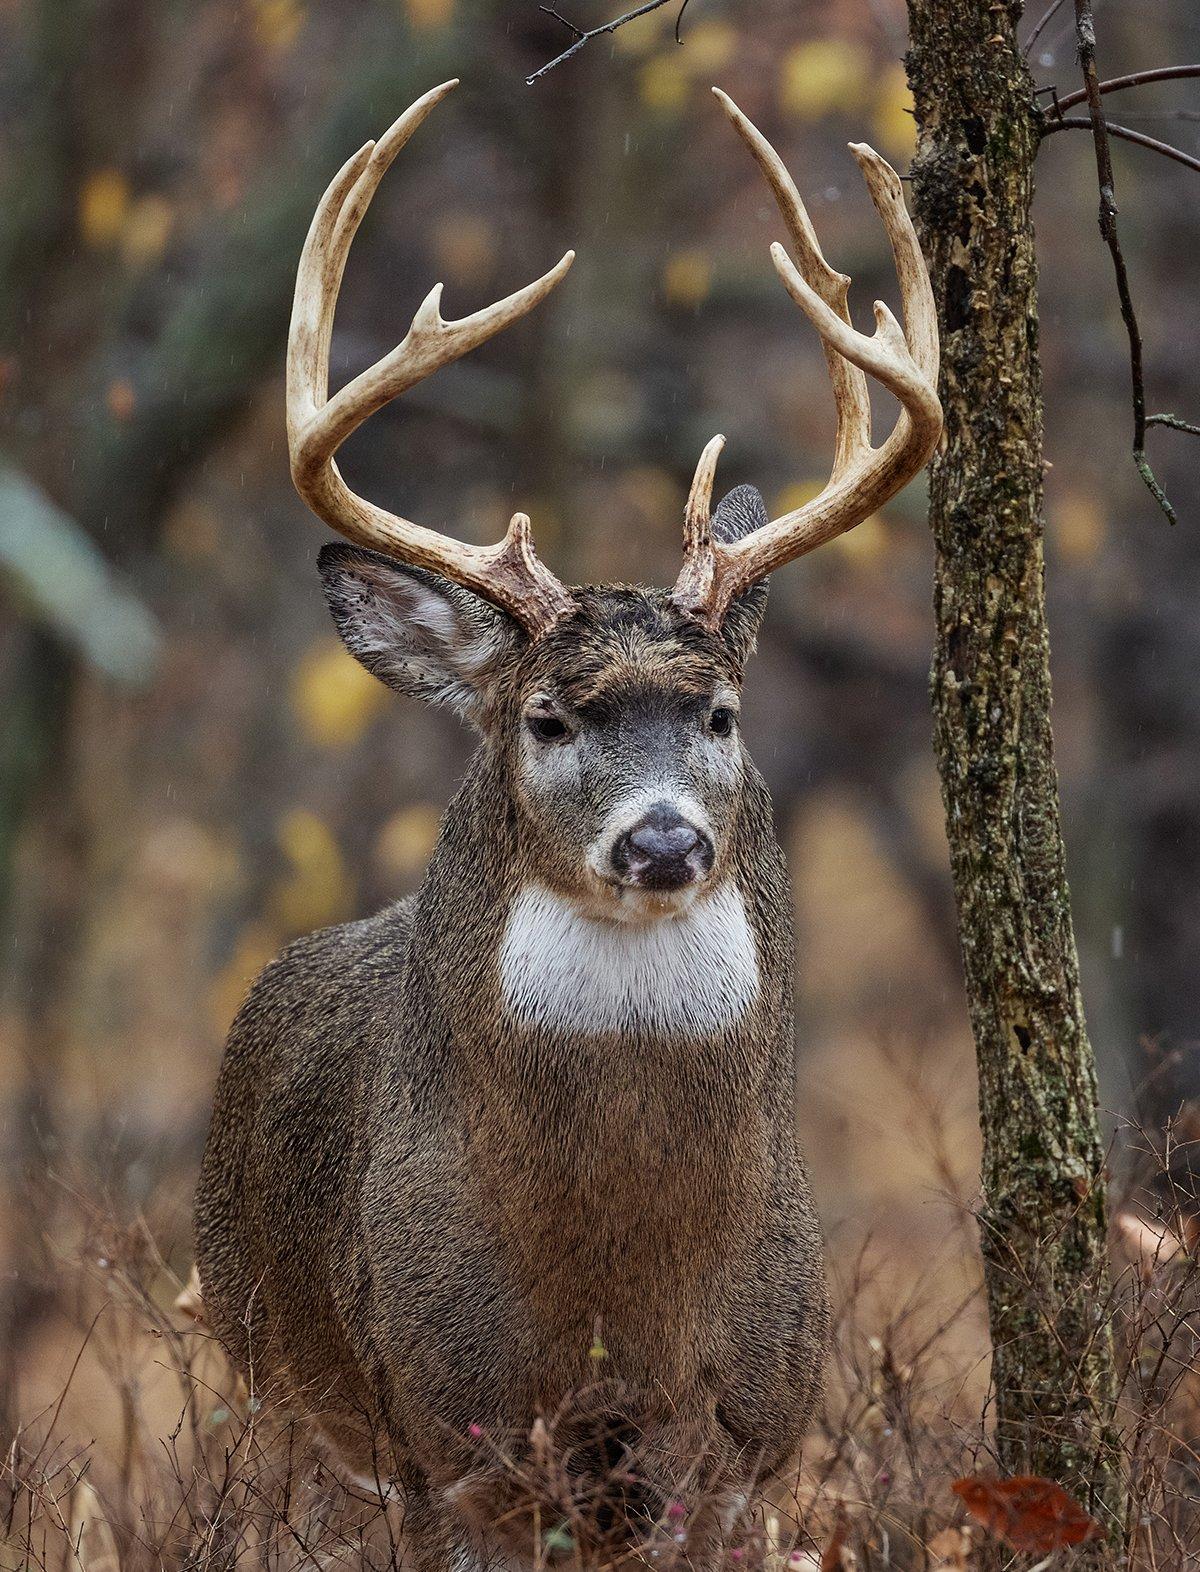 Find the spots that receive the lightest hunting pressure, and that's where the biggest, most mature bucks will be. Image by Rich Waite / Shutterstock